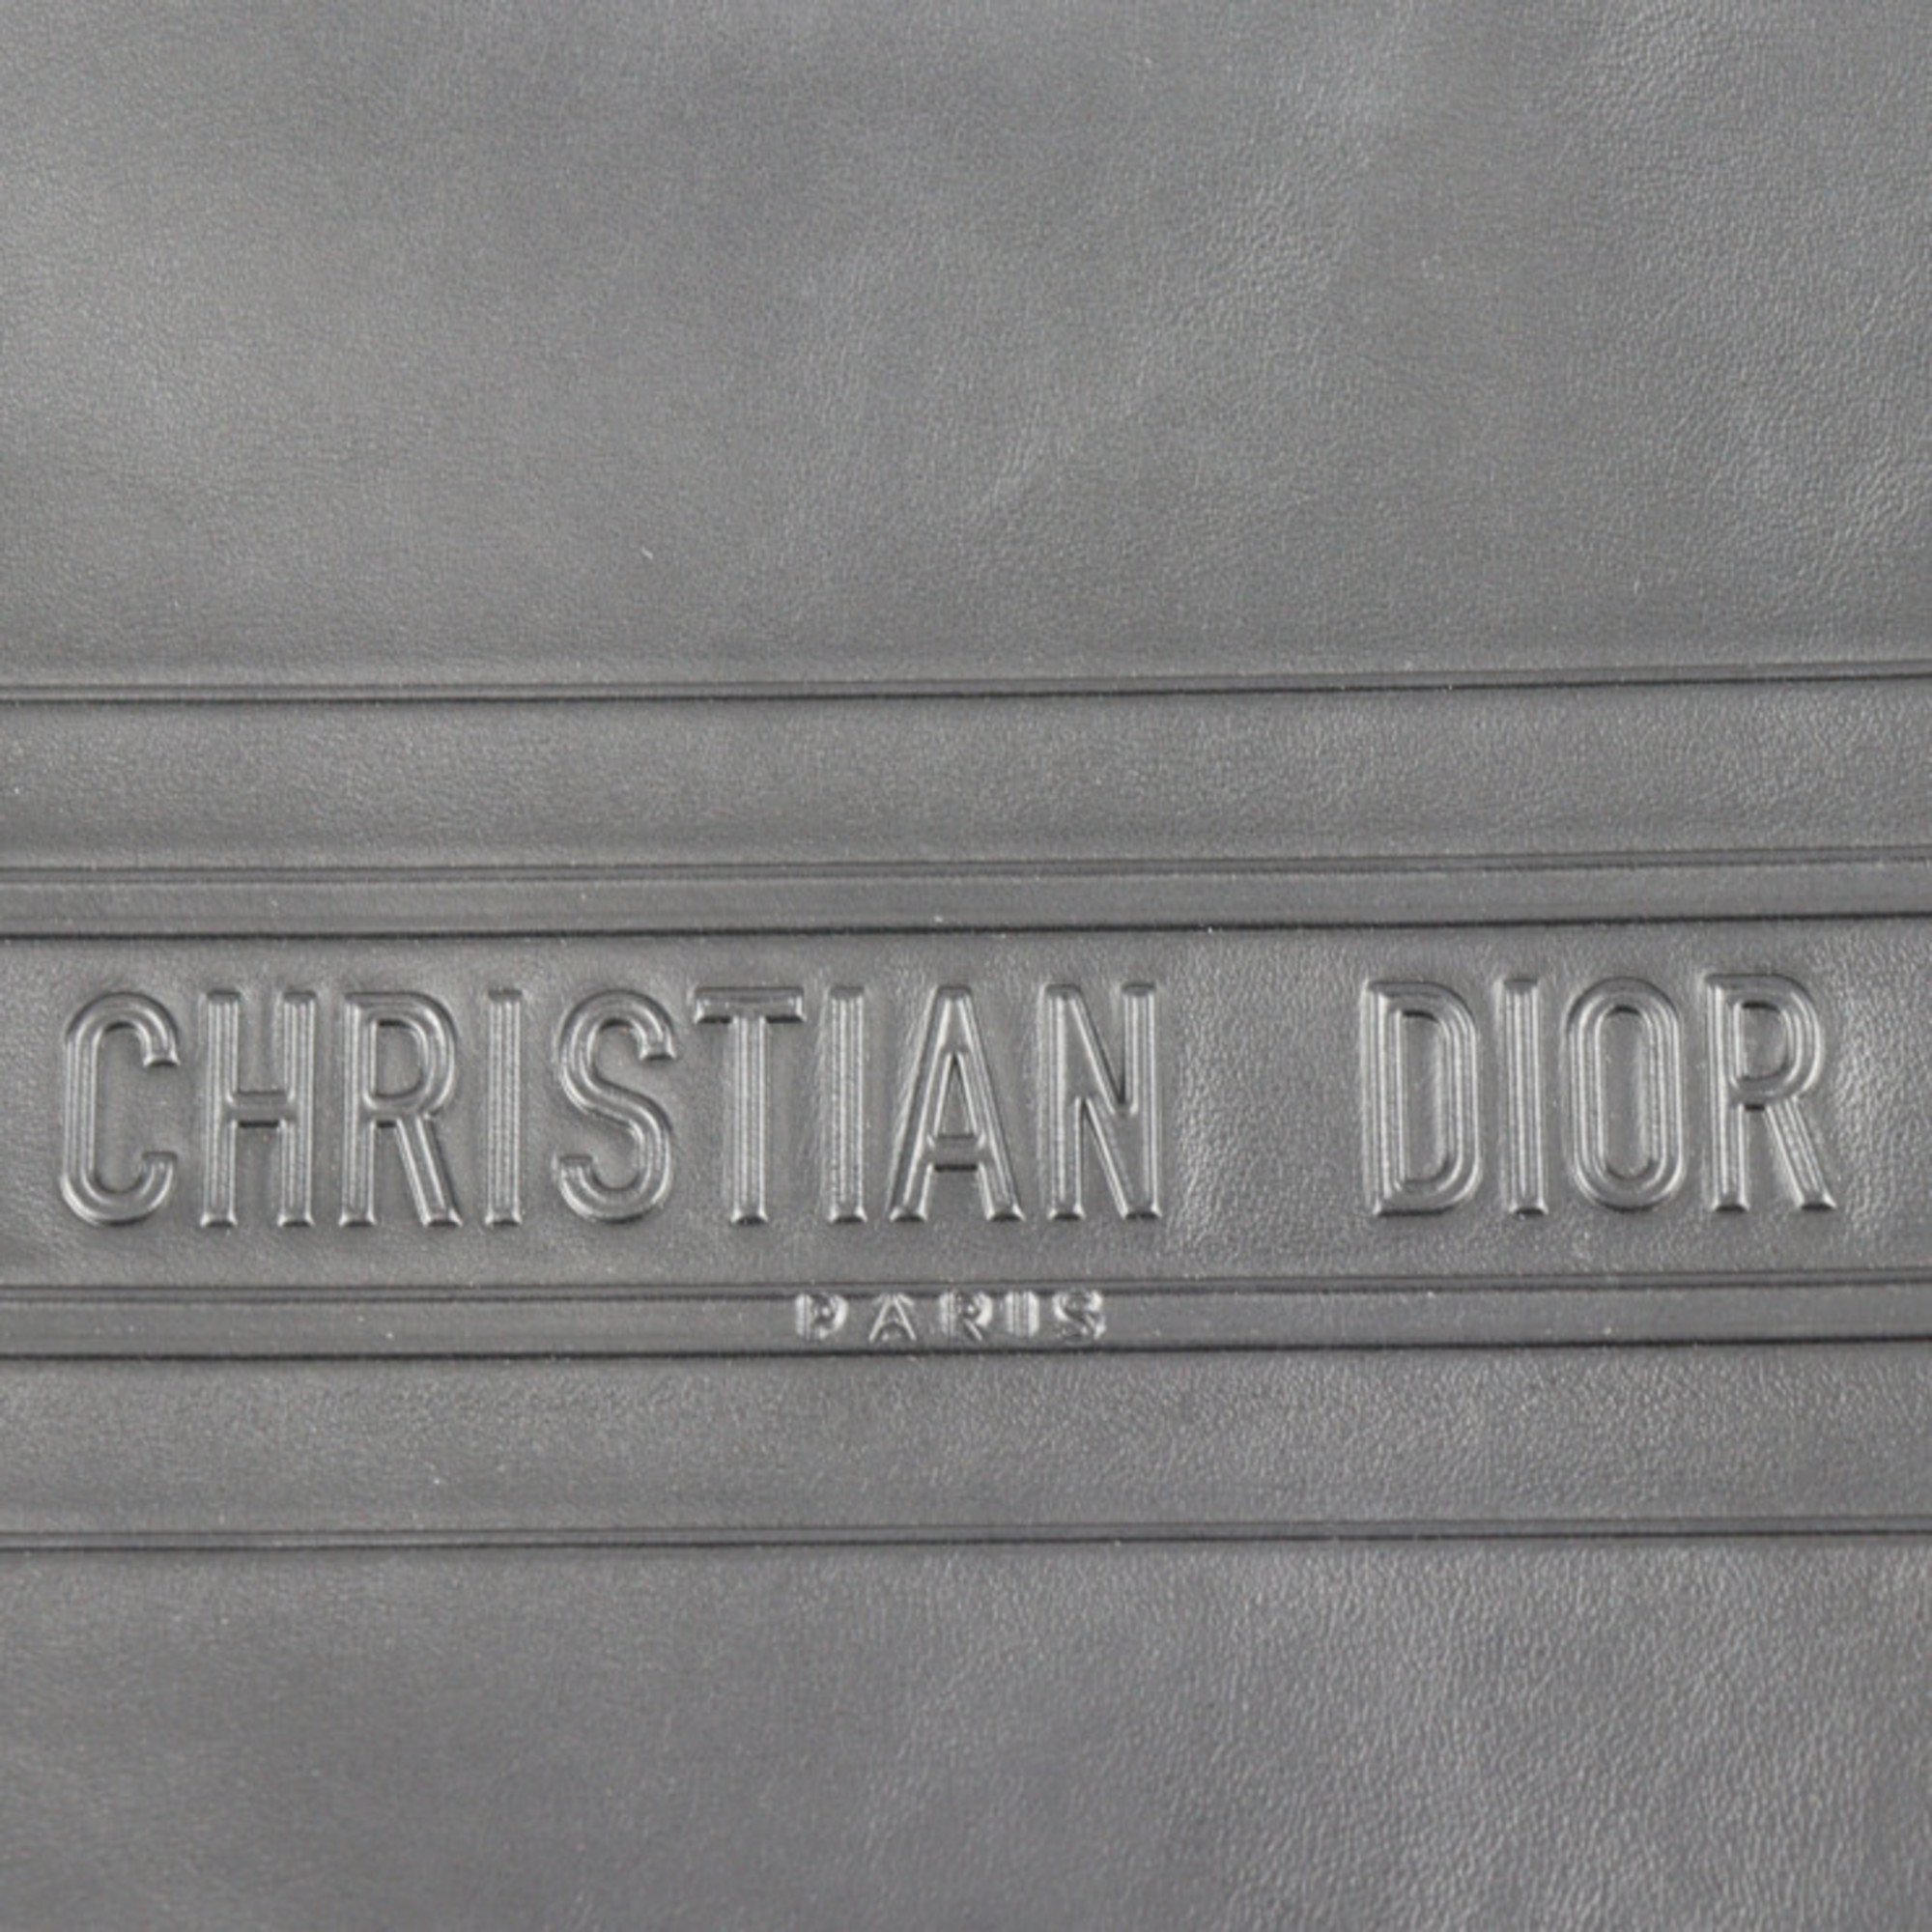 Christian Dior clutch bag 19S5543CGSB leather black gold metal fittings